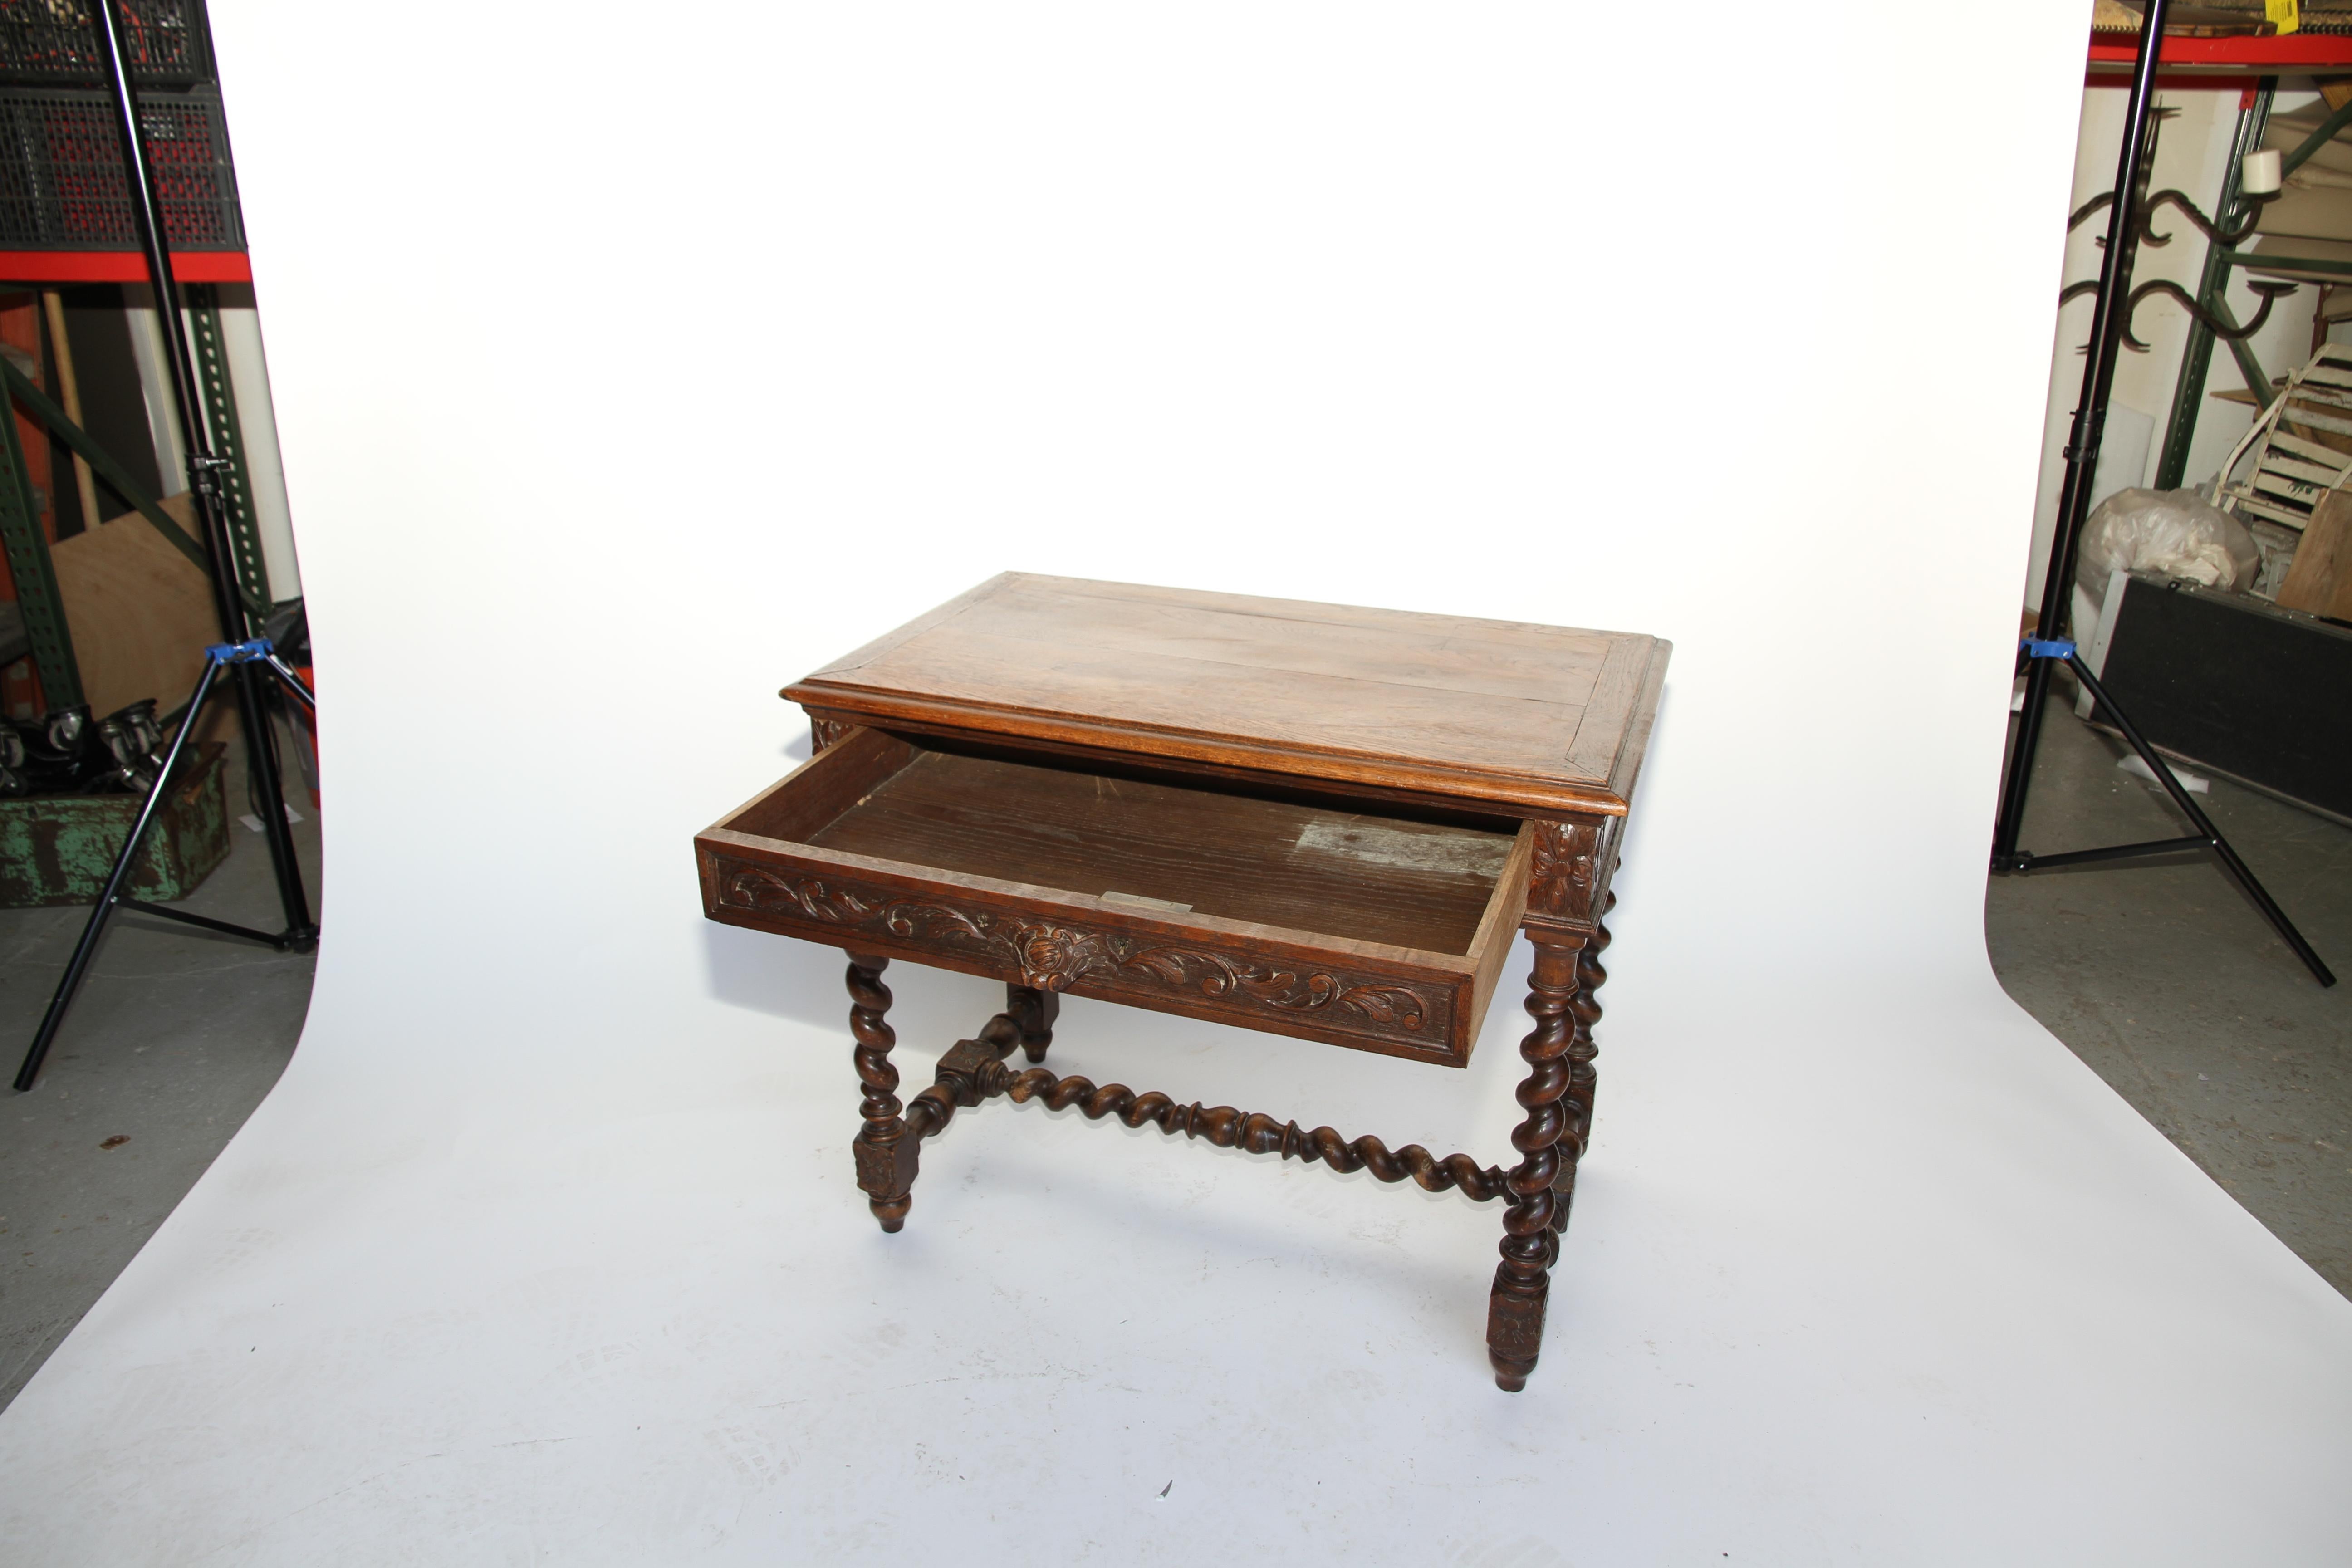 A beautiful 19th century French one drawer twist leg table. There is a key hole and lock, the key is no longer with the piece but could easily be repaired.